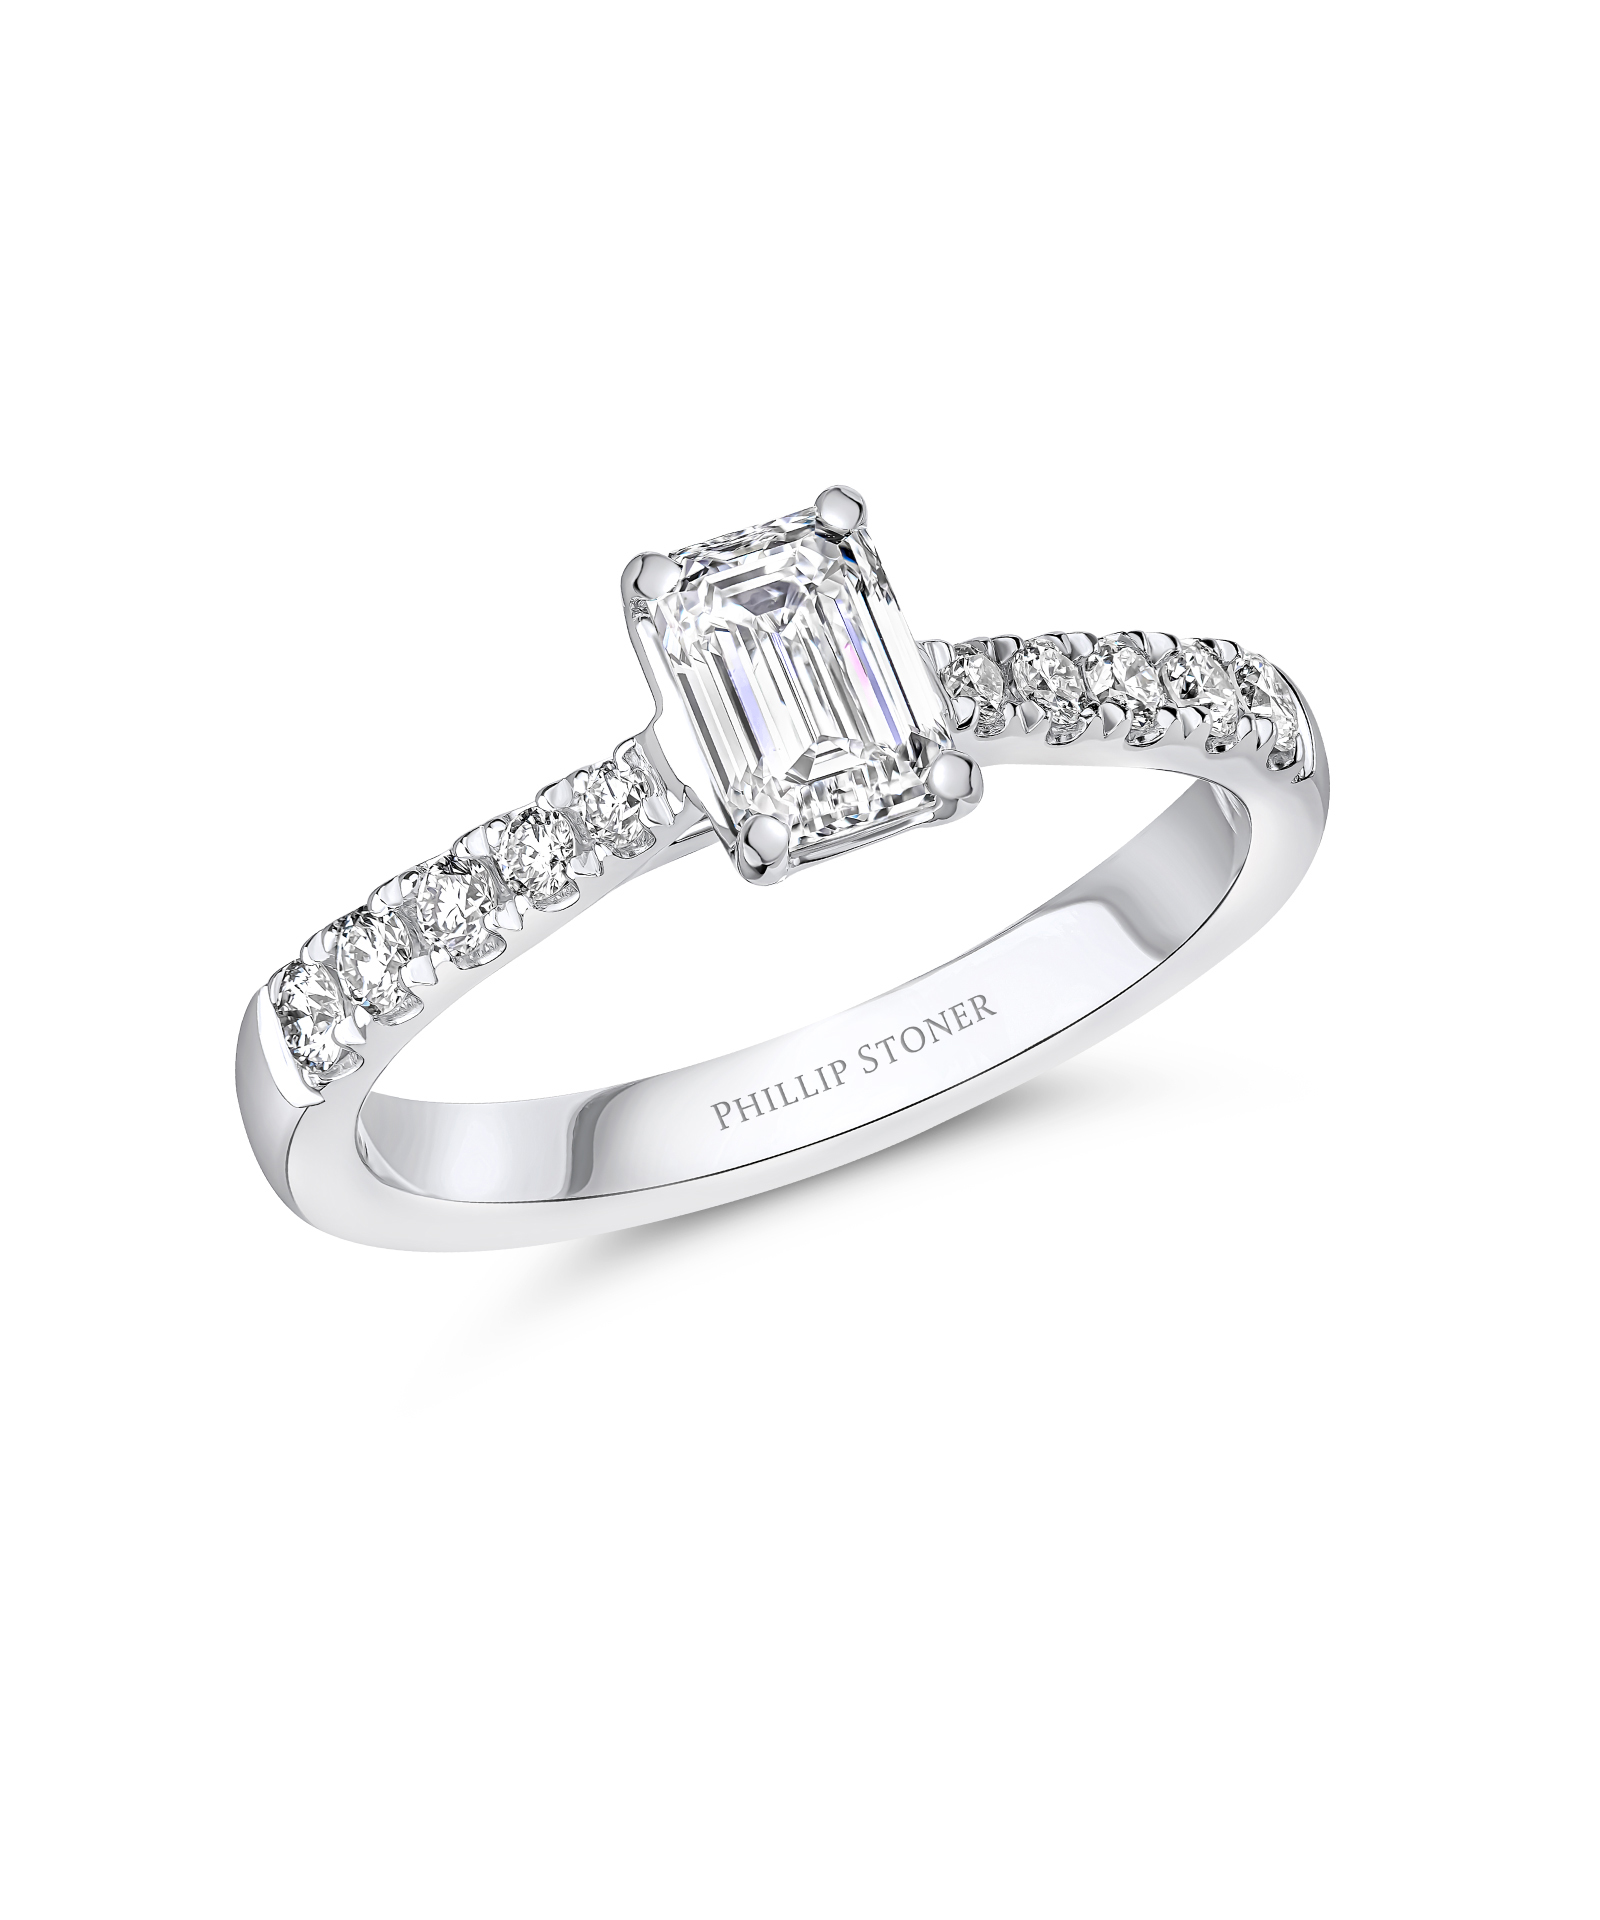 0.70ct Emerald Cut Diamond Engagement Ring with Scallop Set Shoulders - Phillip Stoner The Jeweller